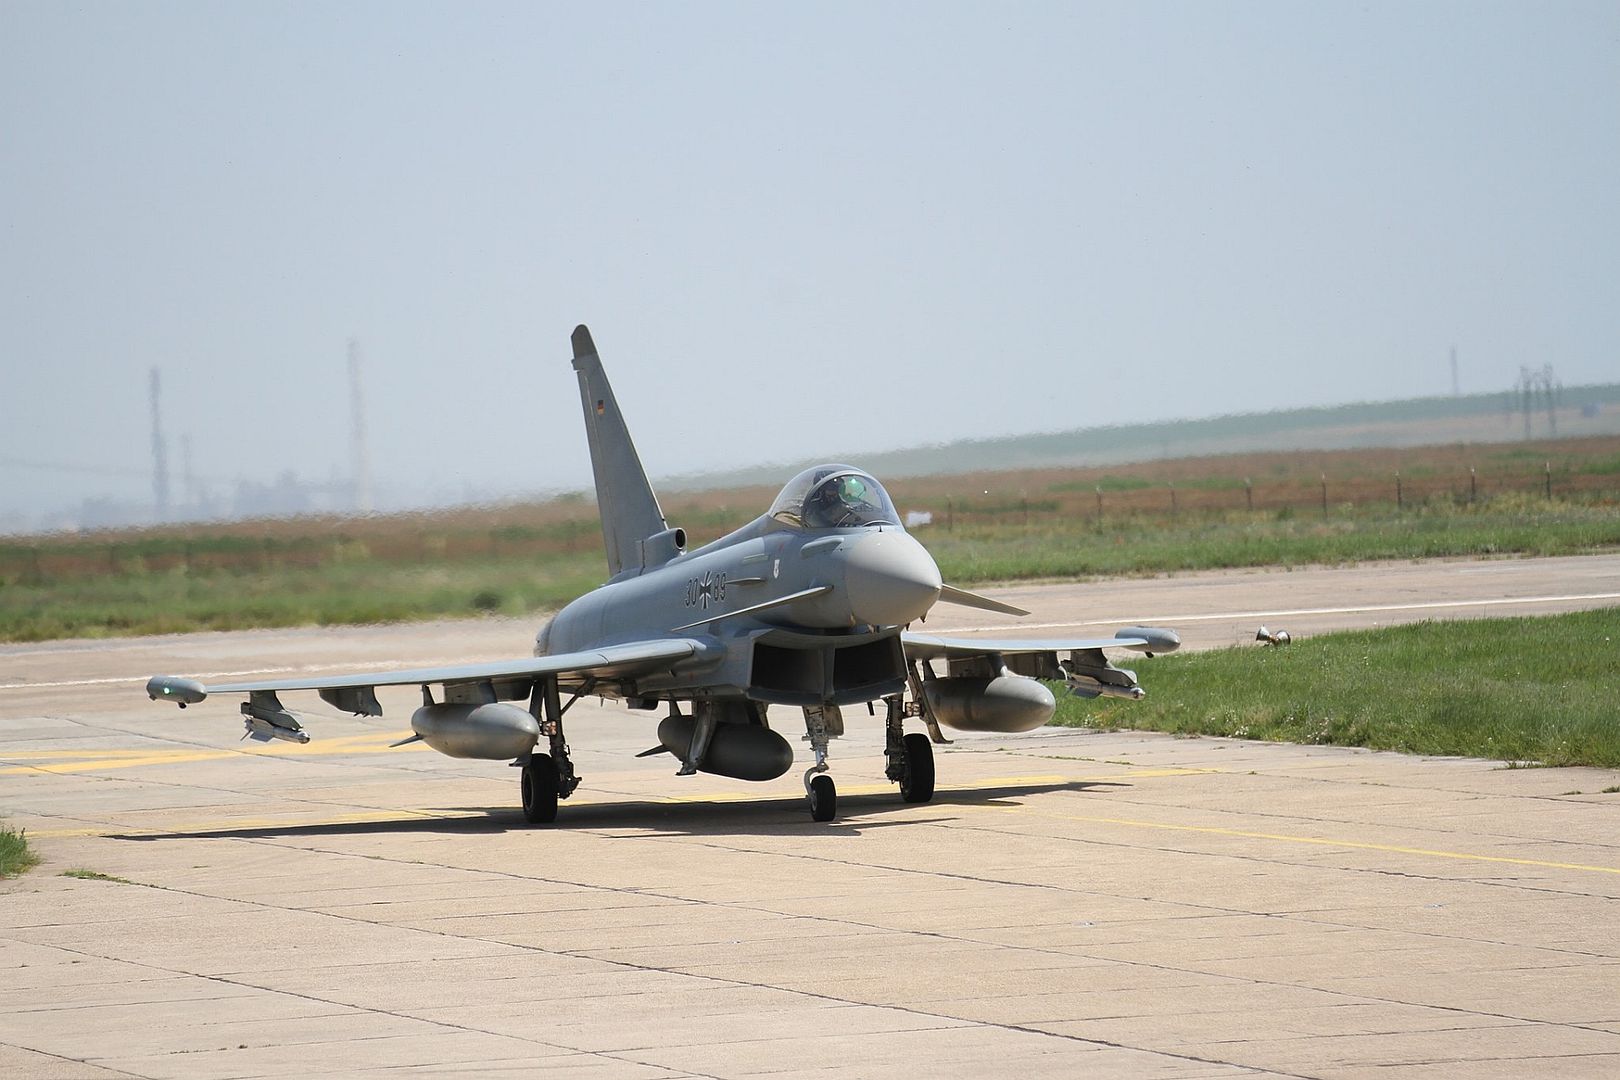 German Air Force Eurofighter Jets Have Arrived In Romania To Undertake Combined Quick Reaction Alert Training Alongside The RAF